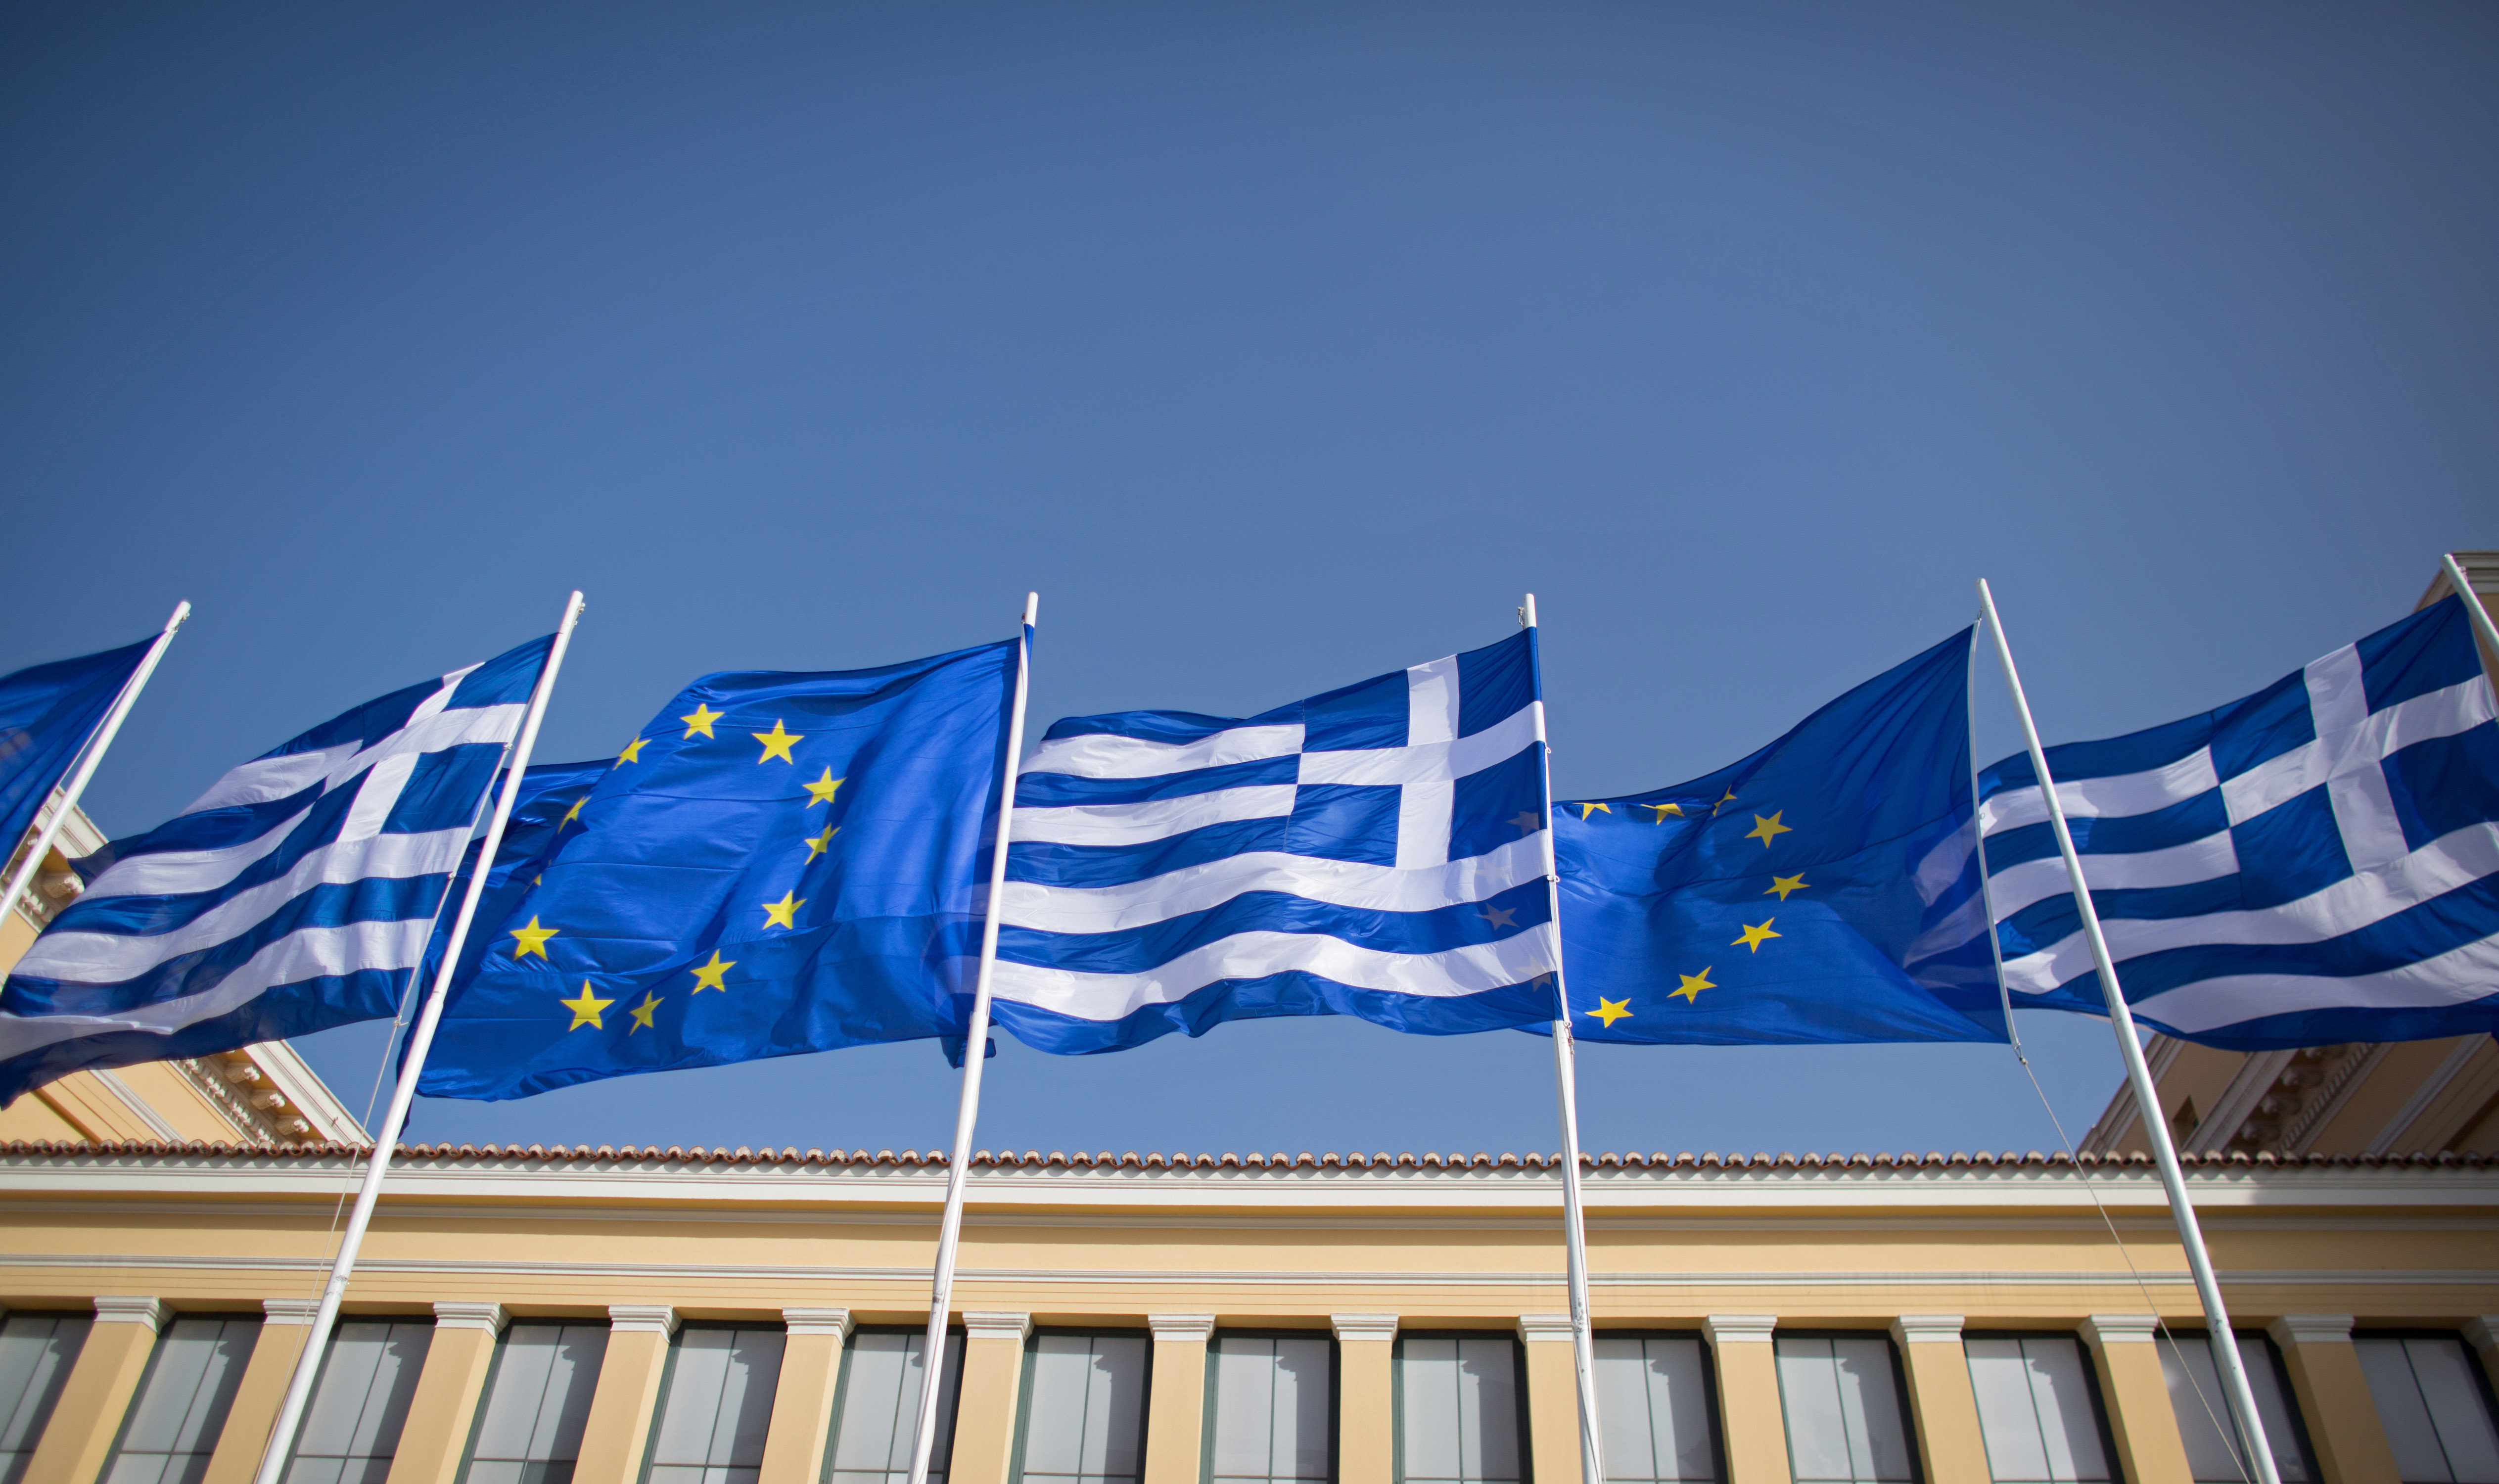 The Greek court will hear the appeal Friday.